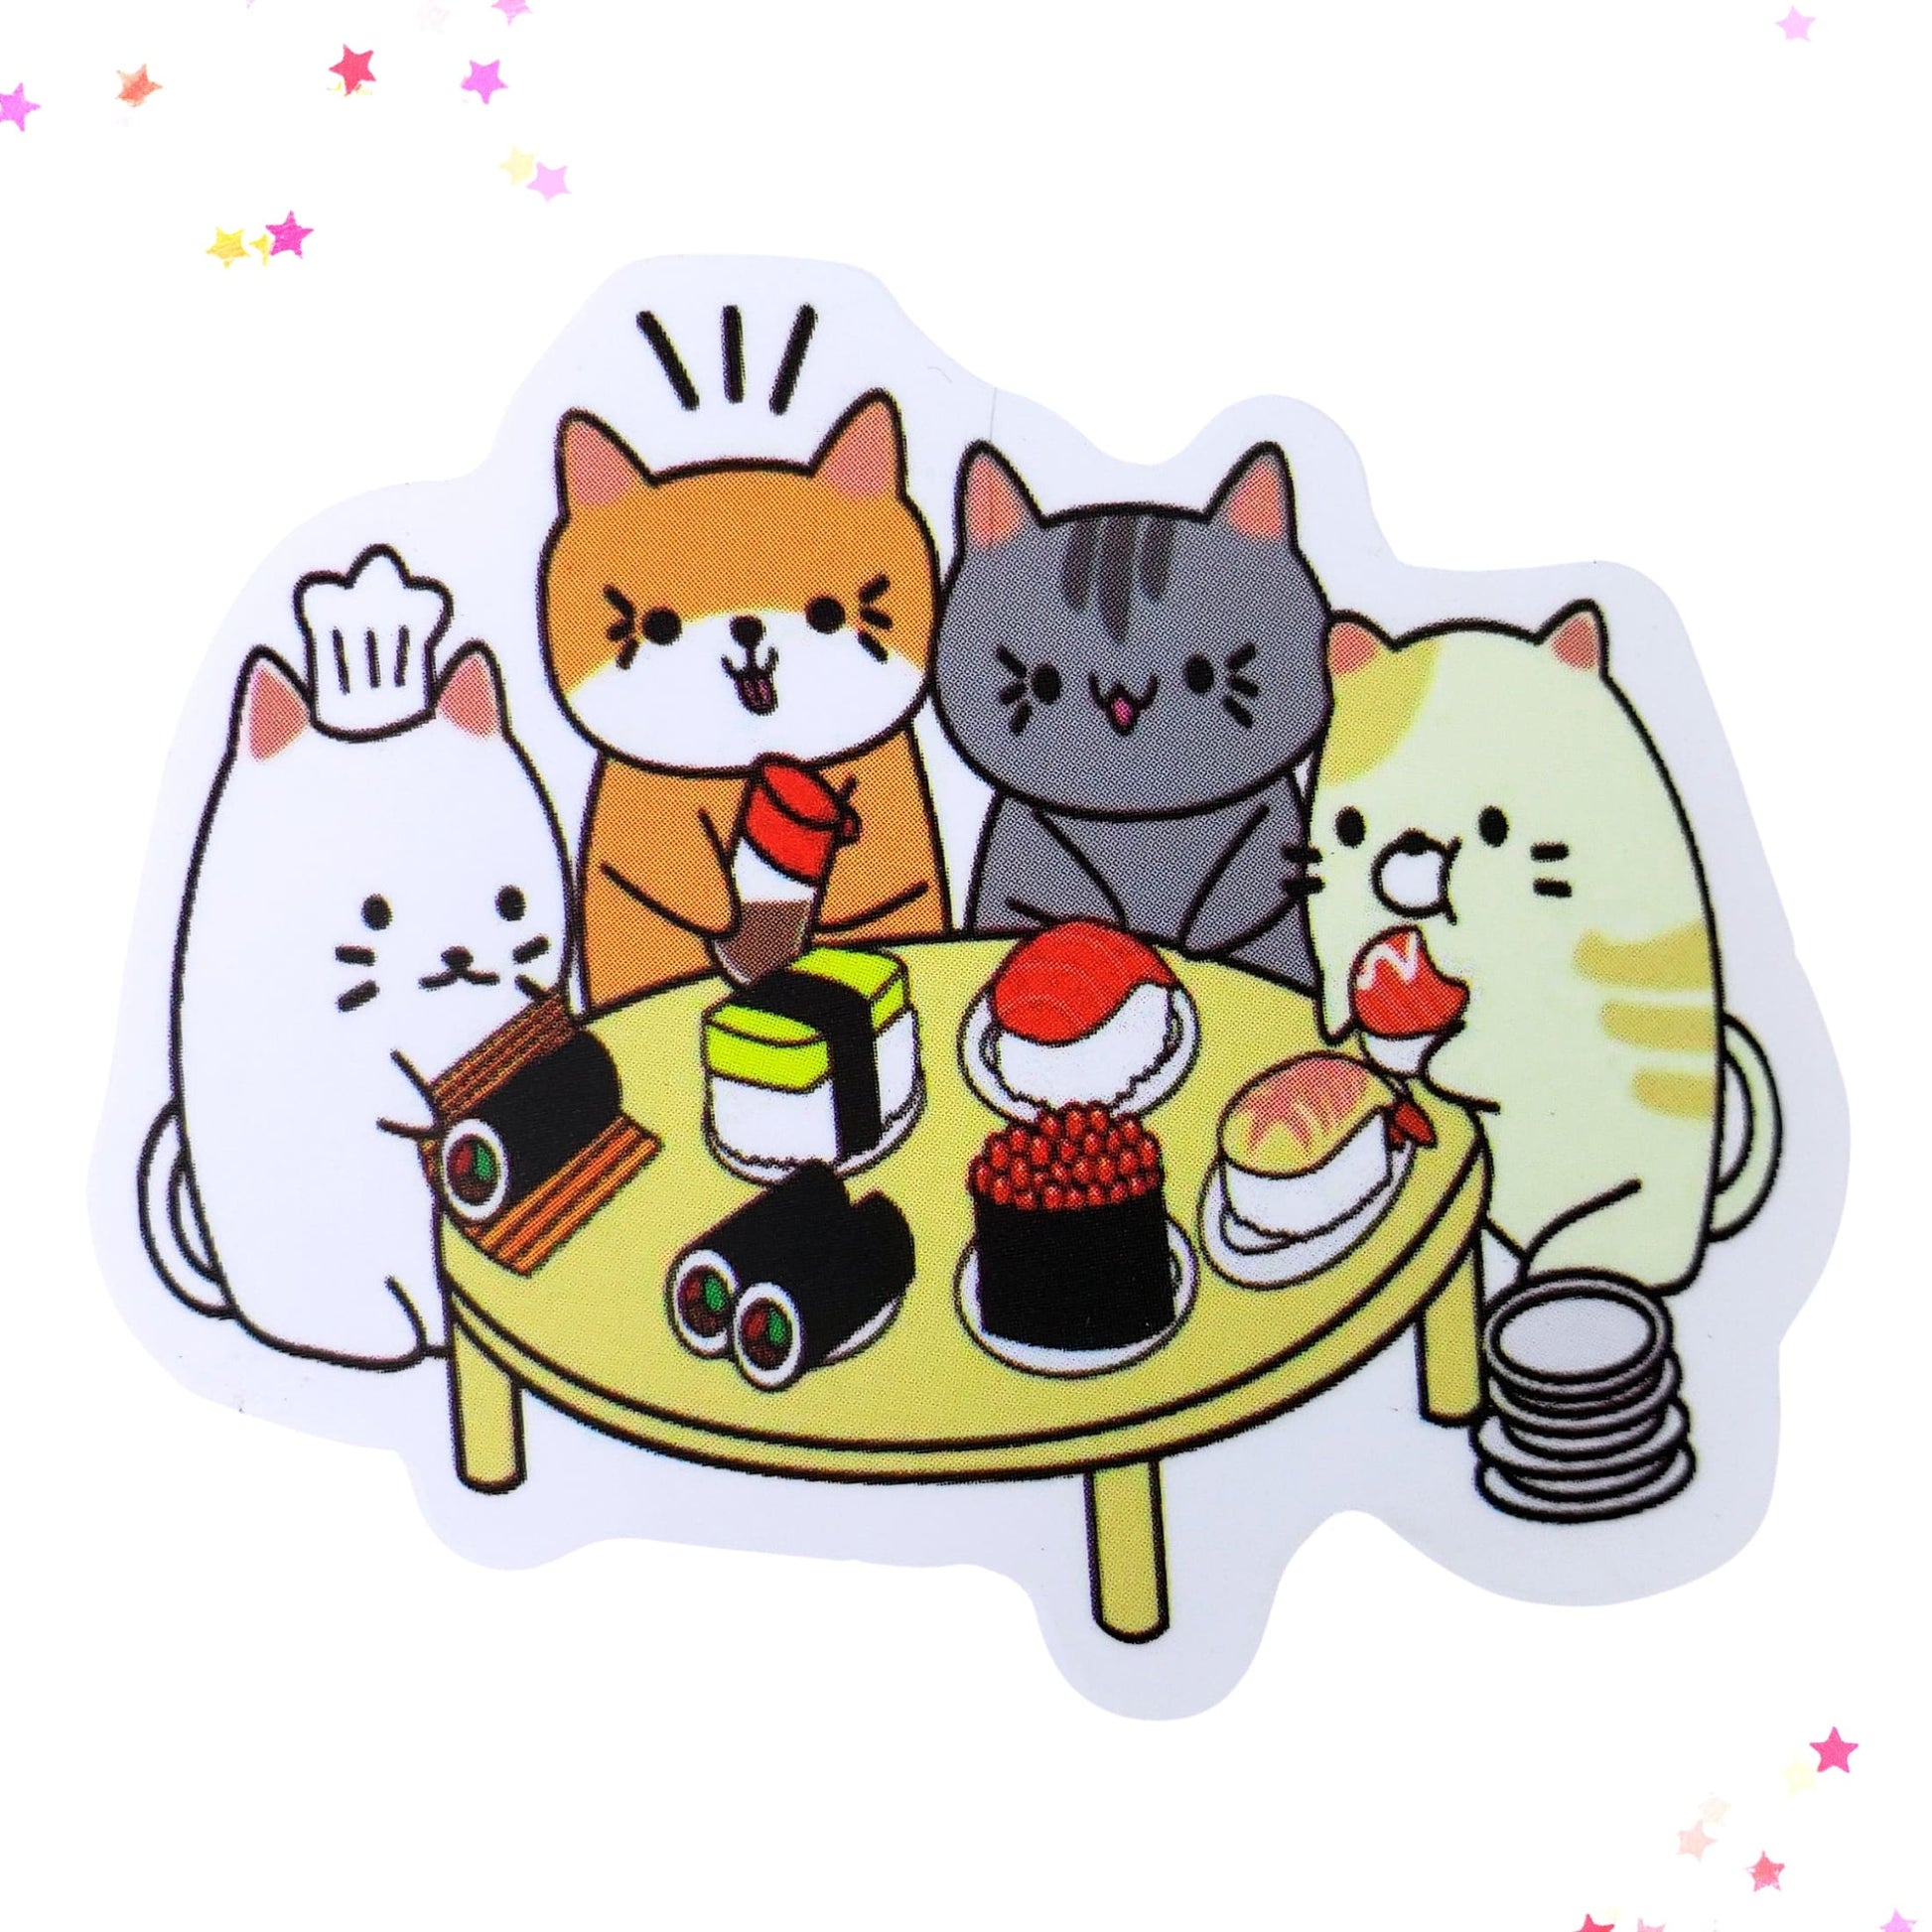 Sushi with Friends Waterproof Sticker from Confetti Kitty, Only 1.00